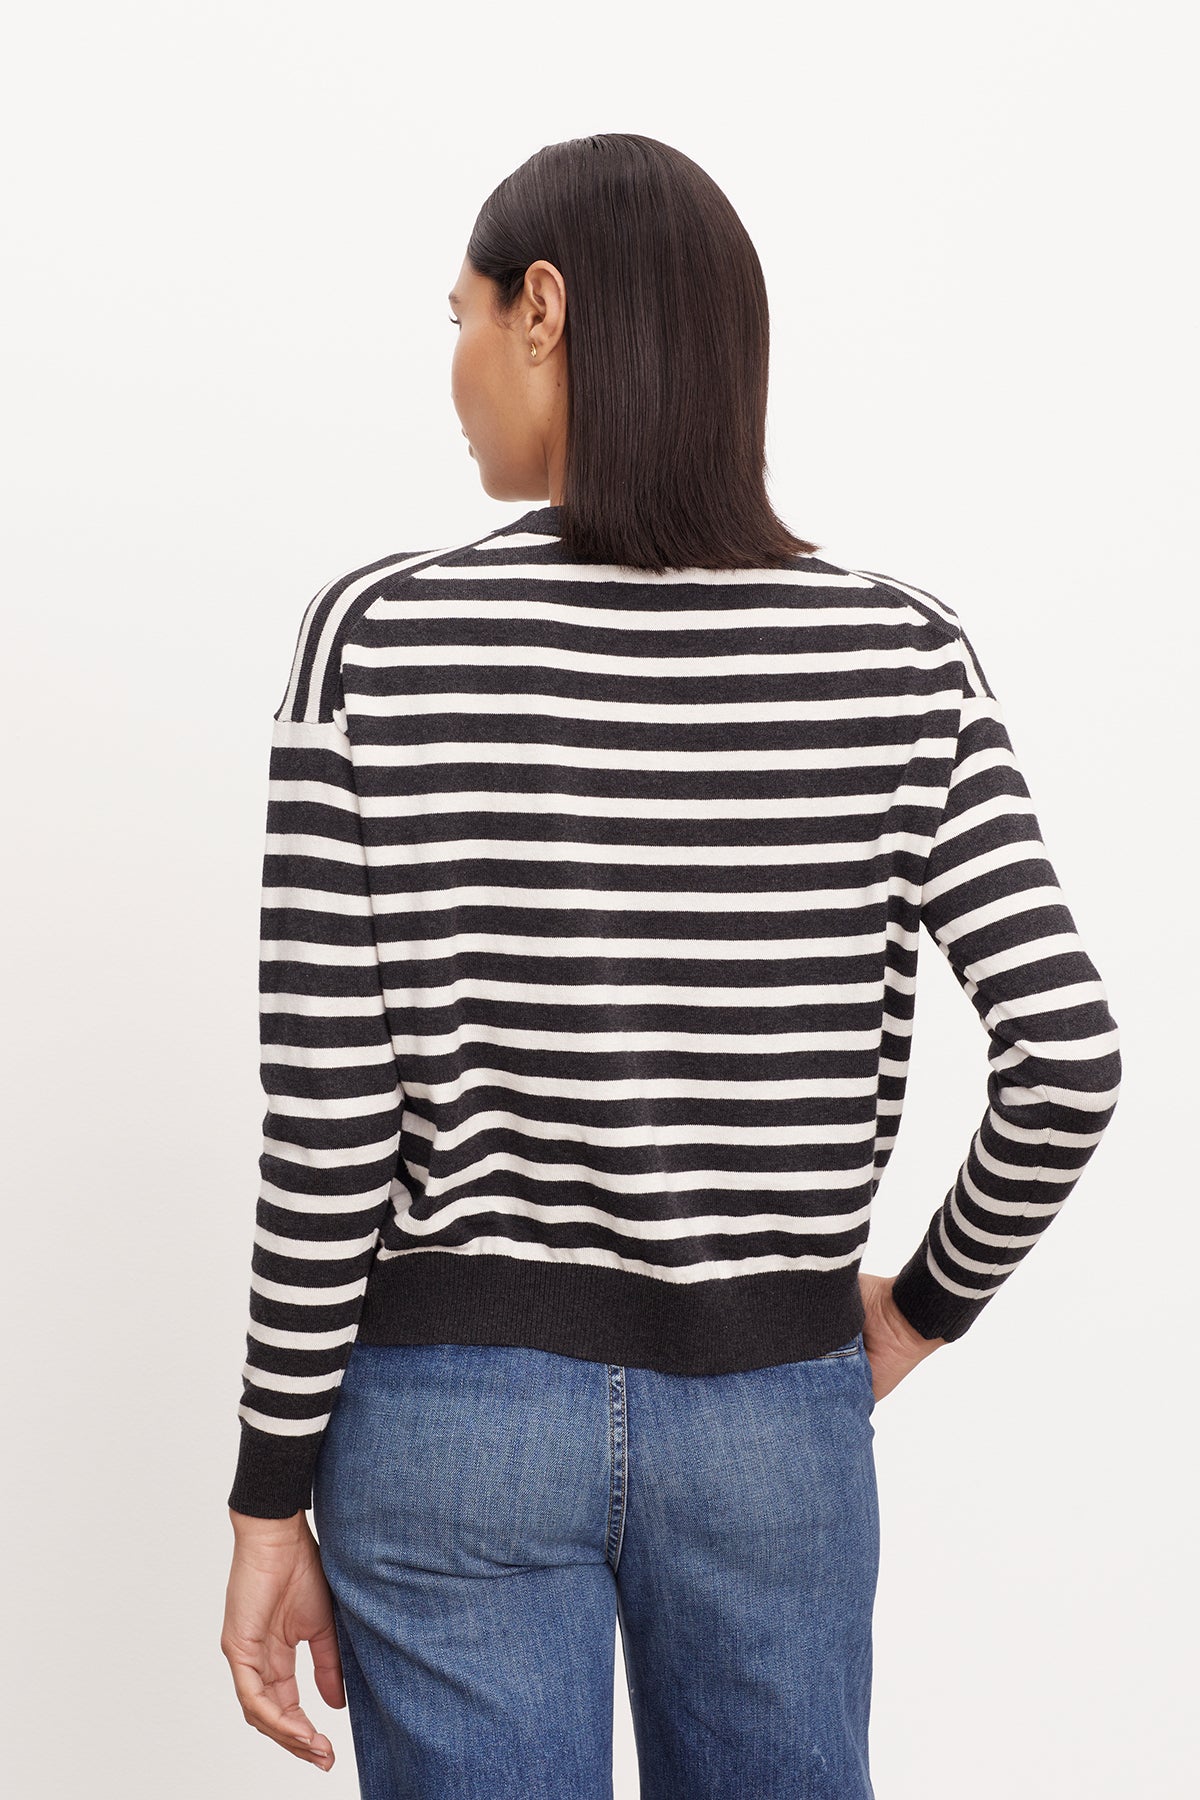 The back view of a woman wearing a Velvet by Graham & Spencer ALISTER STRIPED CREW NECK SWEATER.-26799864742081